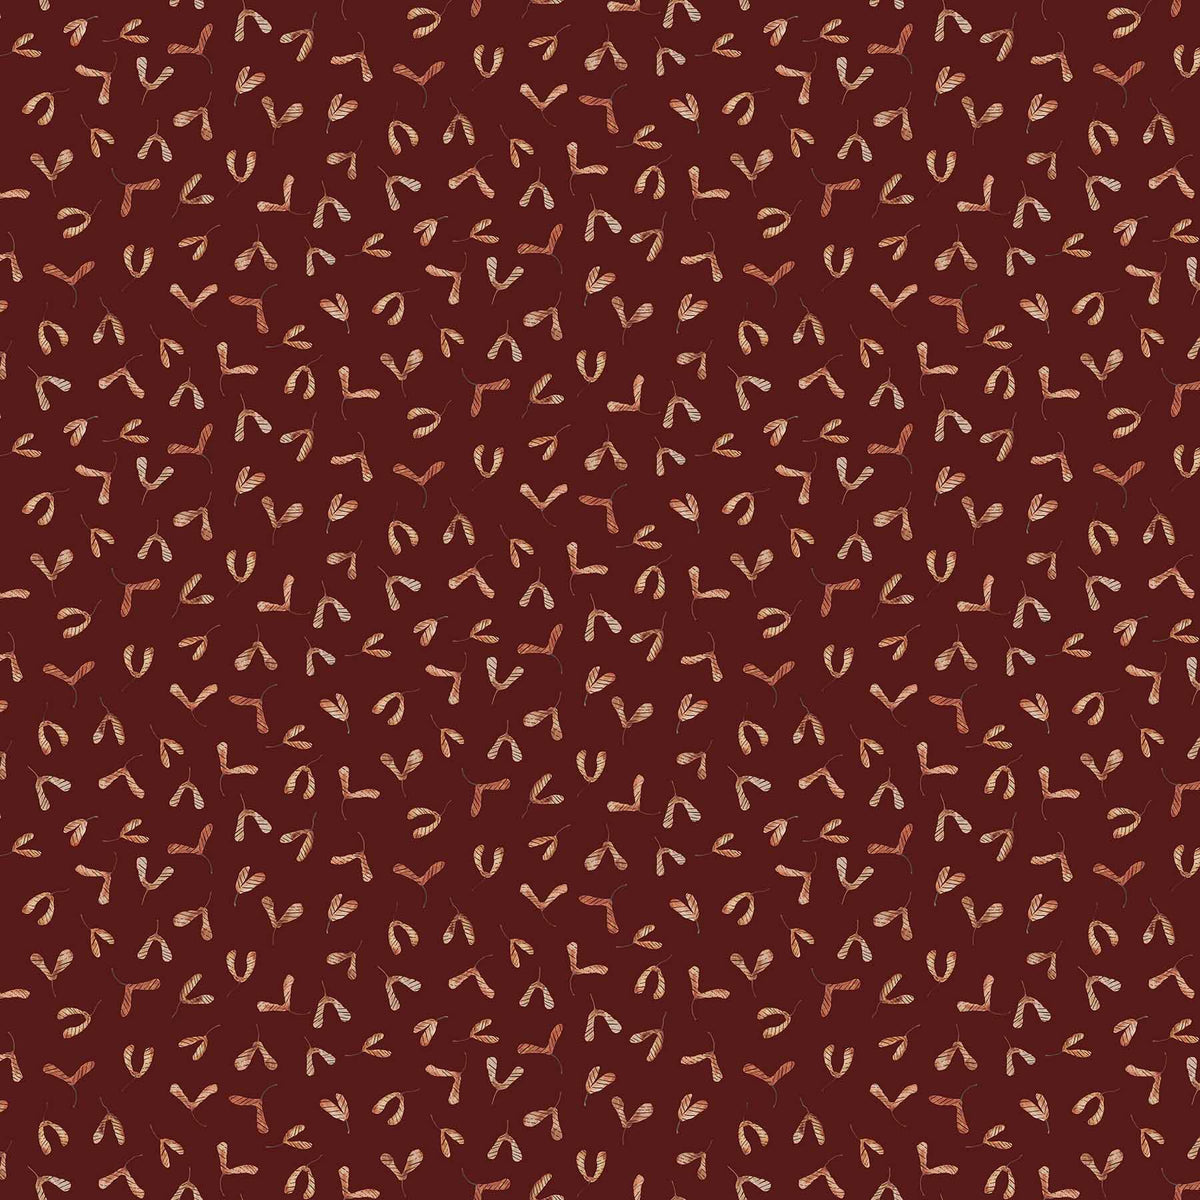 After the Rain Quilt Fabric - Maple Seeds on Mulberry Brown - 90164 29